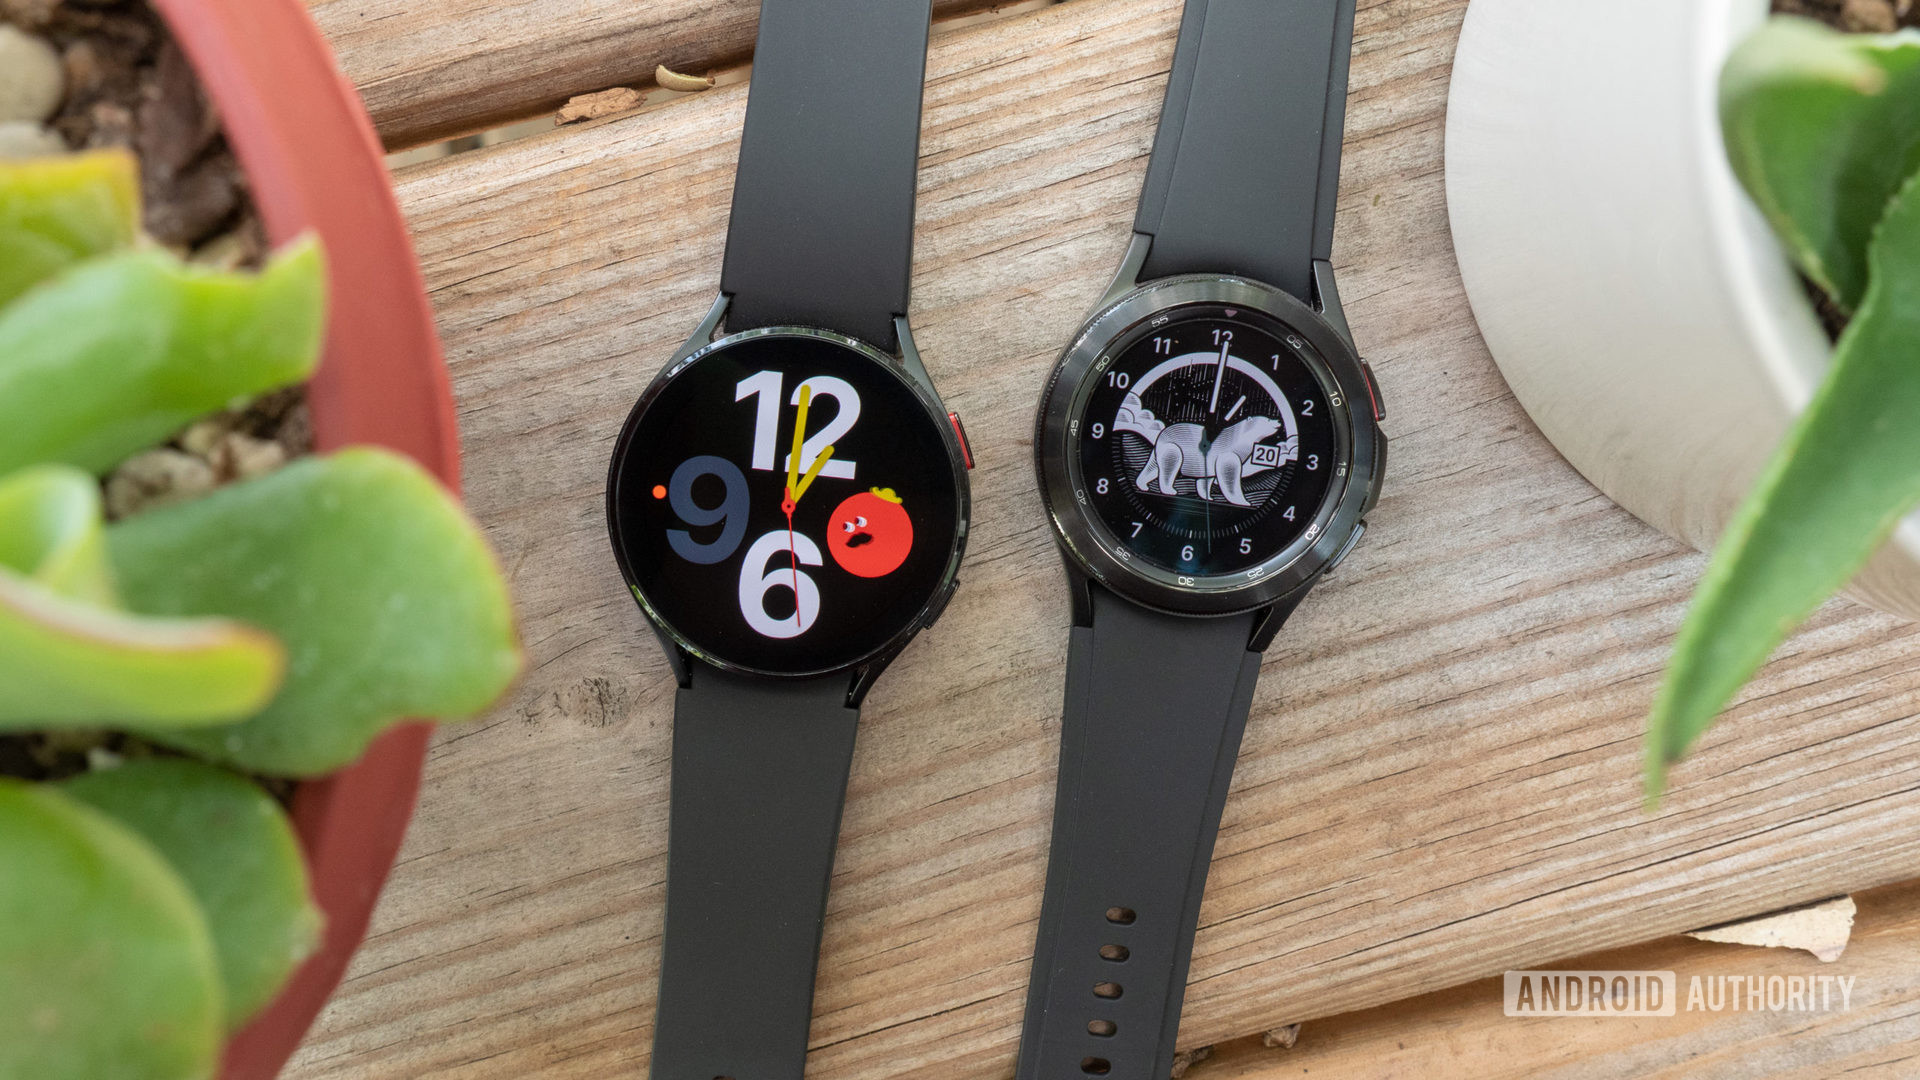 The Samsung Galaxy Watch 4 and Samsung Galaxy Watch 4 Classic on a table